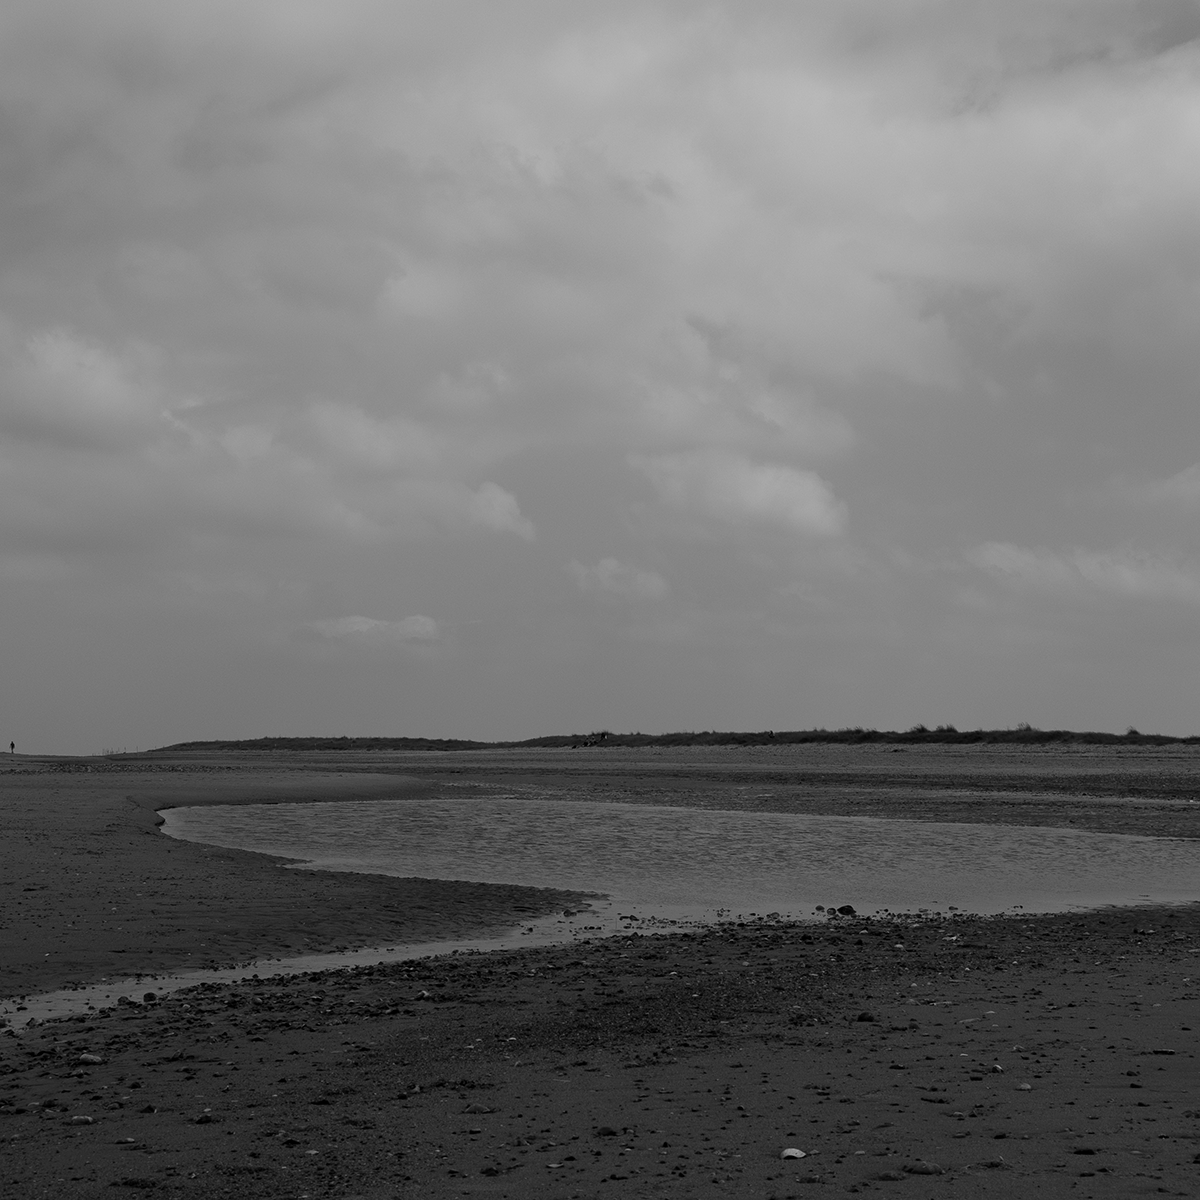 Holme-next-the-Sea - water across sand link image